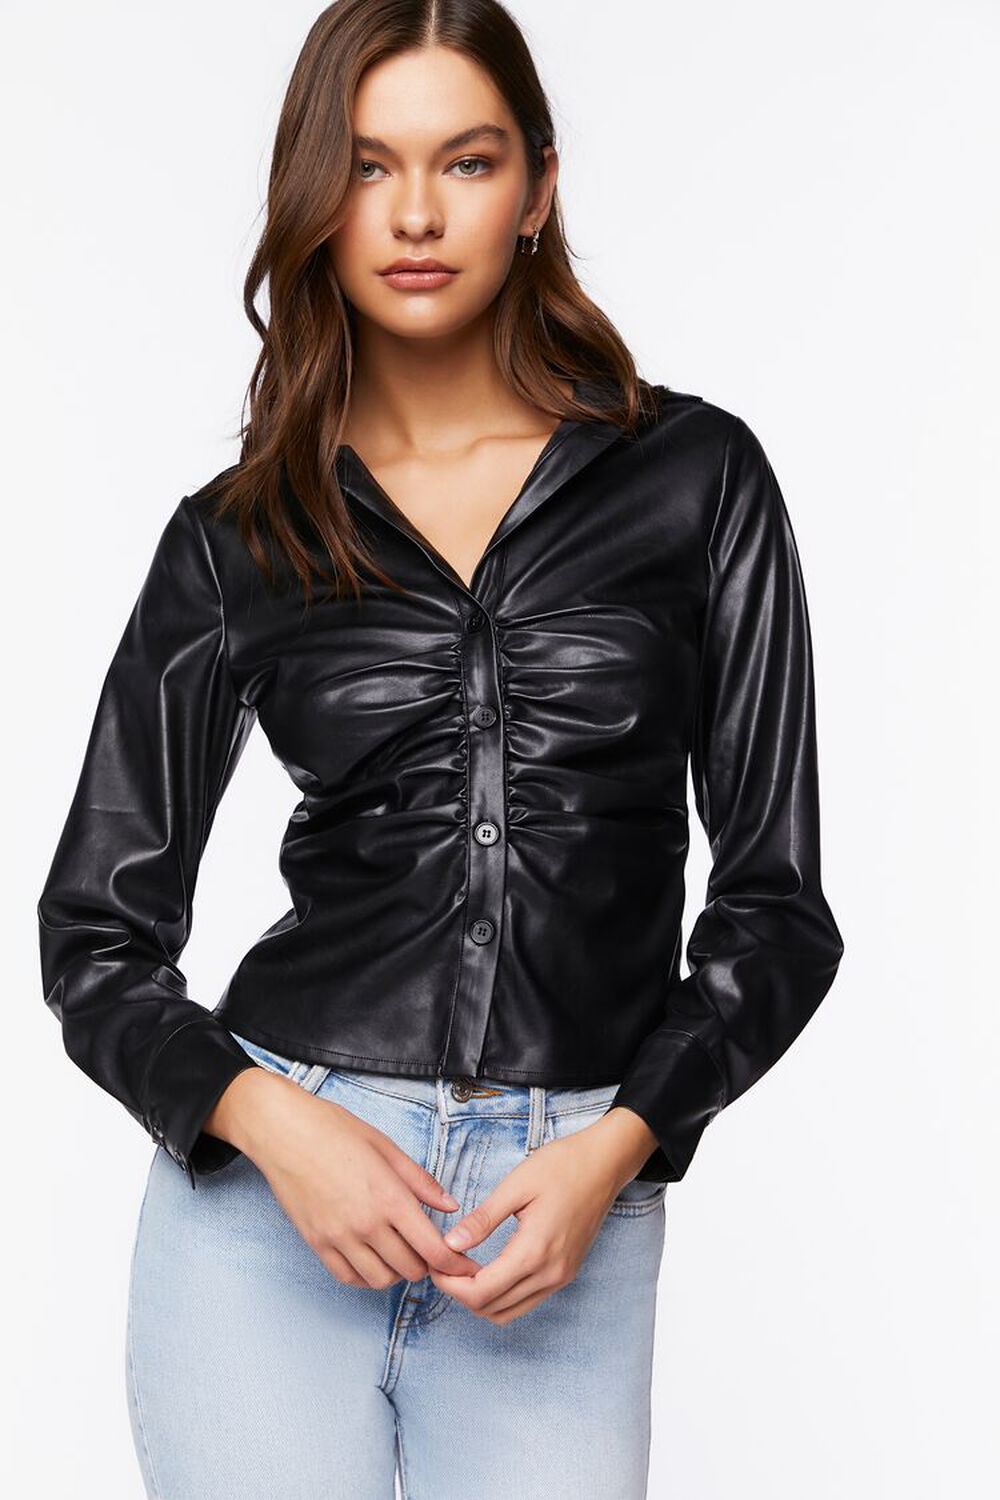 BLACK Faux Leather Ruched Shirt, image 1